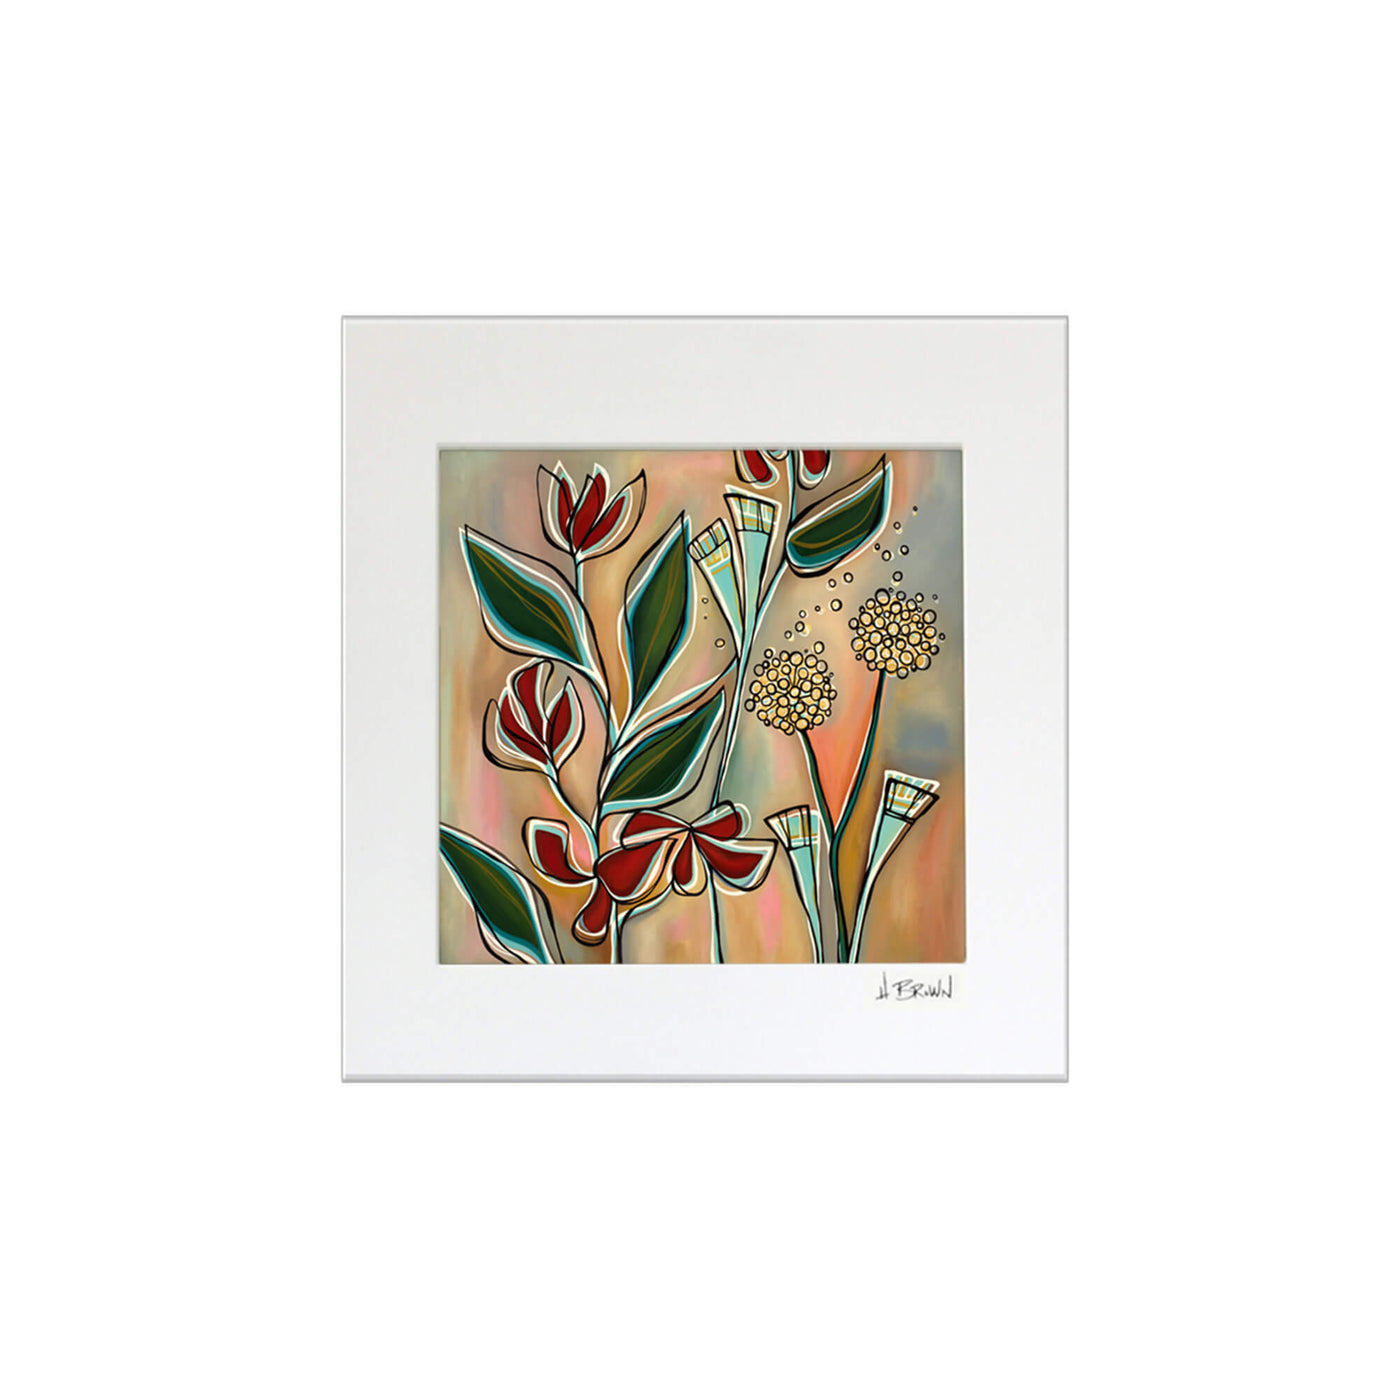 A matted art print of red and yellow tropical flowers by Hawaii surf artist Heather Brown